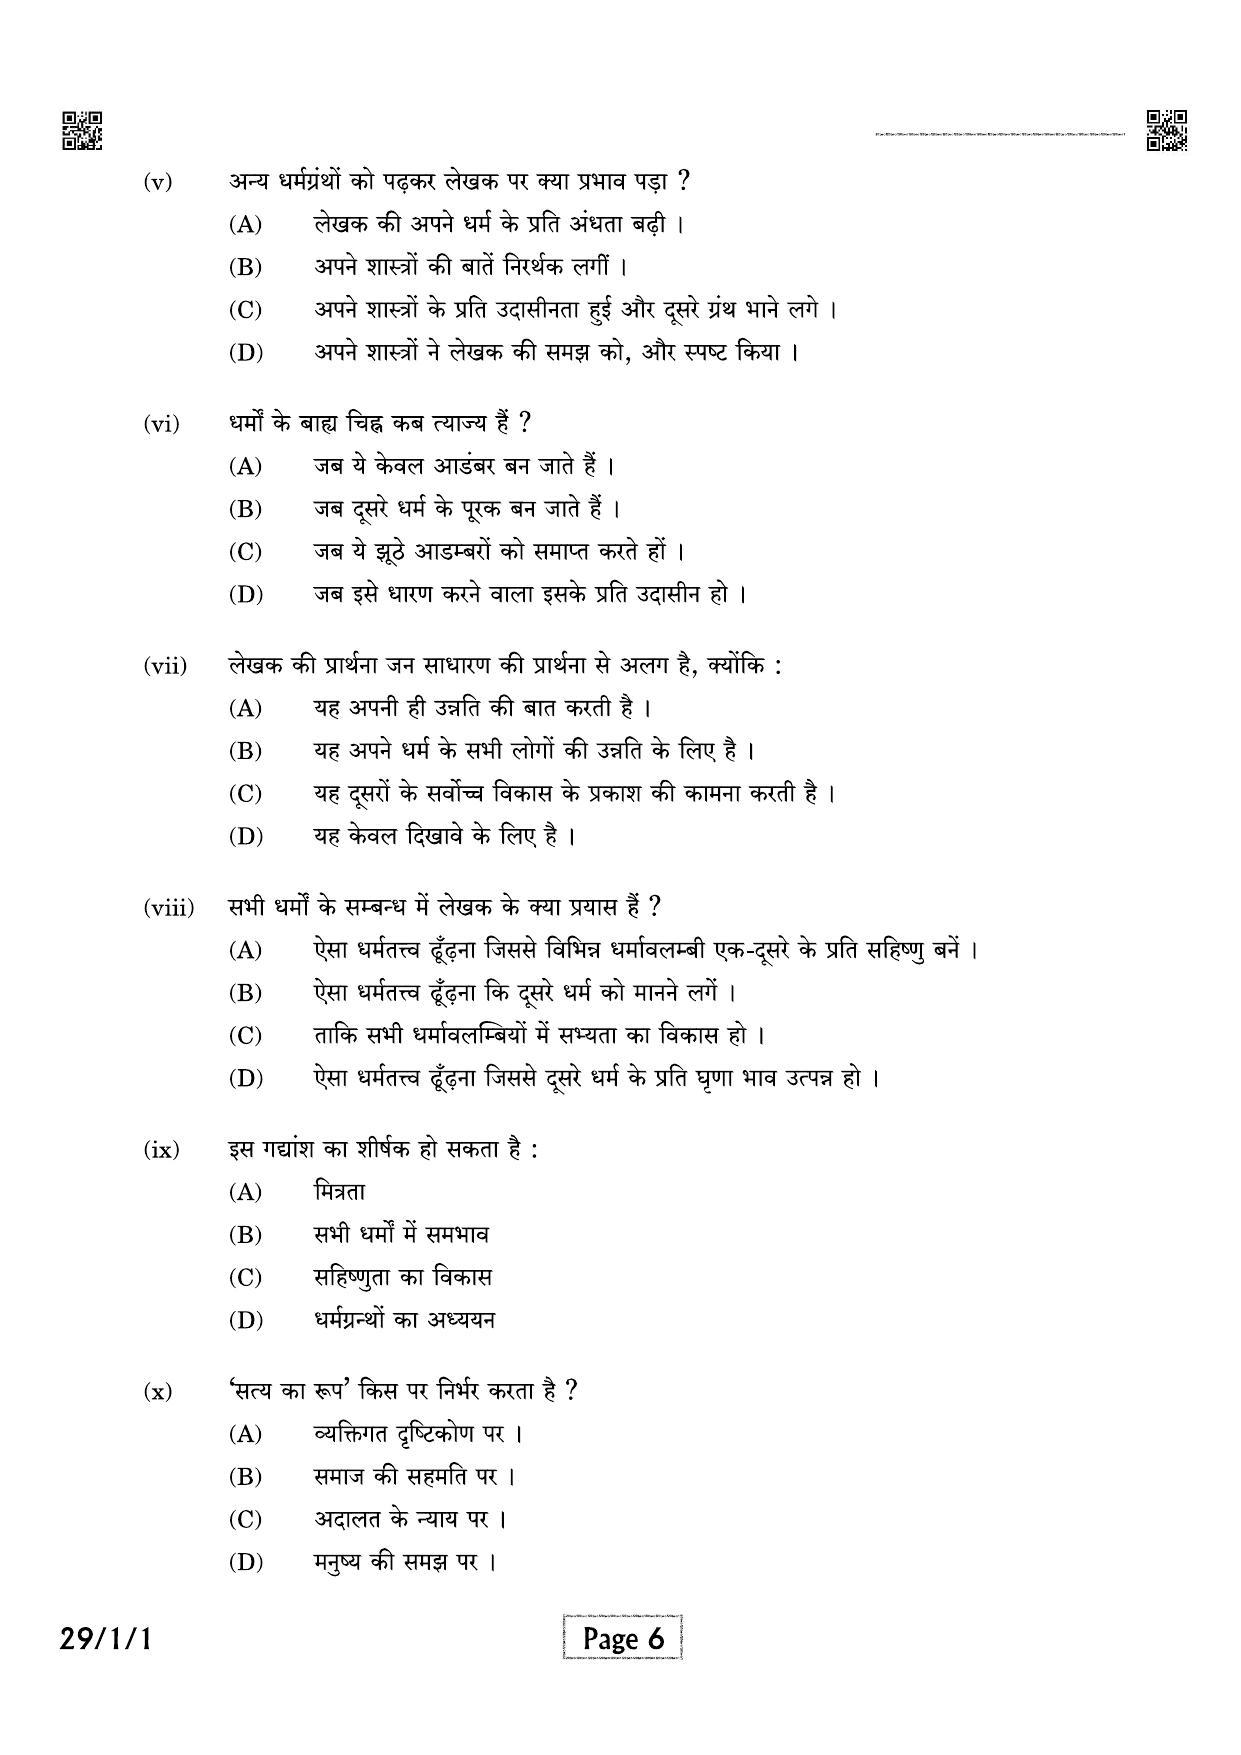 CBSE Class 12 QP_002_HINDI_ELECTIVE 2021 Compartment Question Paper - Page 6